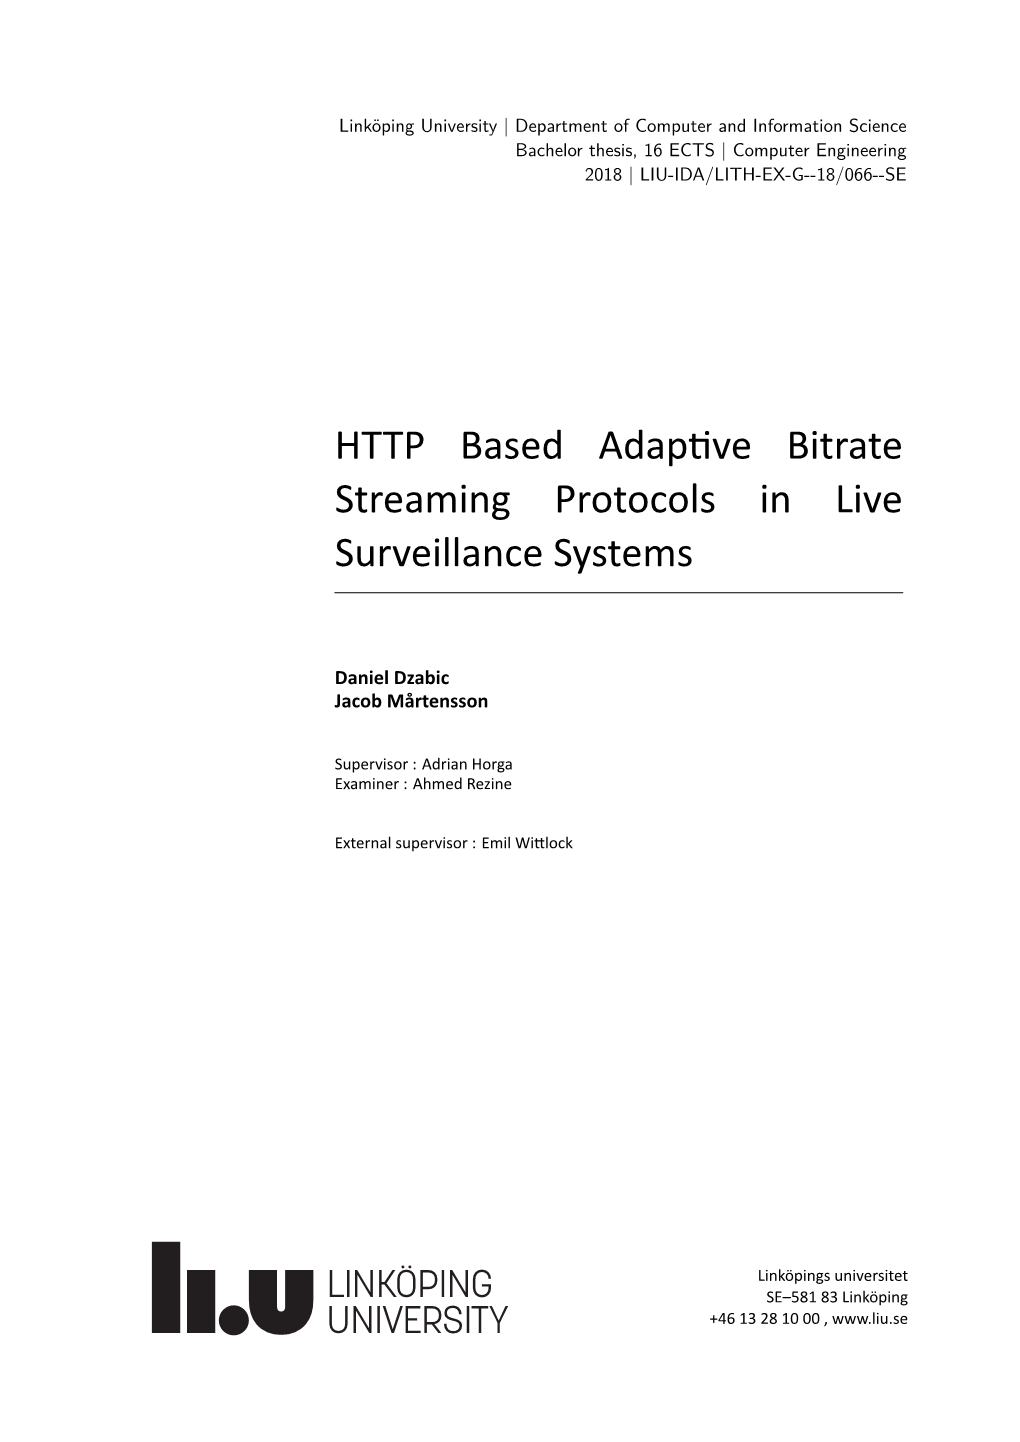 HTTP Based Adap Ve Bitrate Streaming Protocols in Live